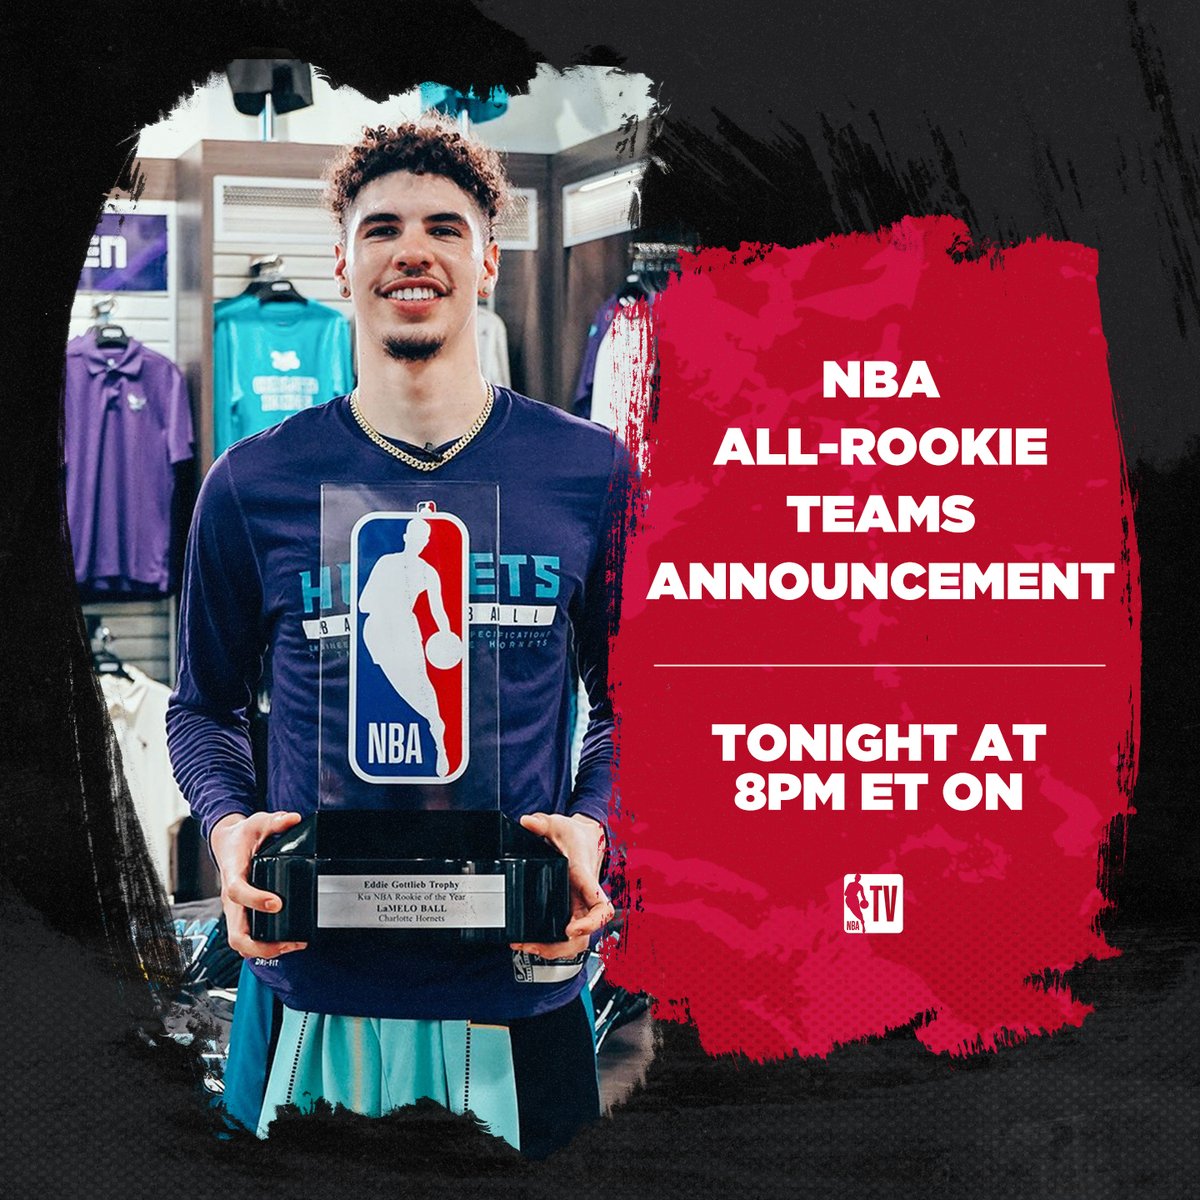 lamelo ball rookie of the year trophy